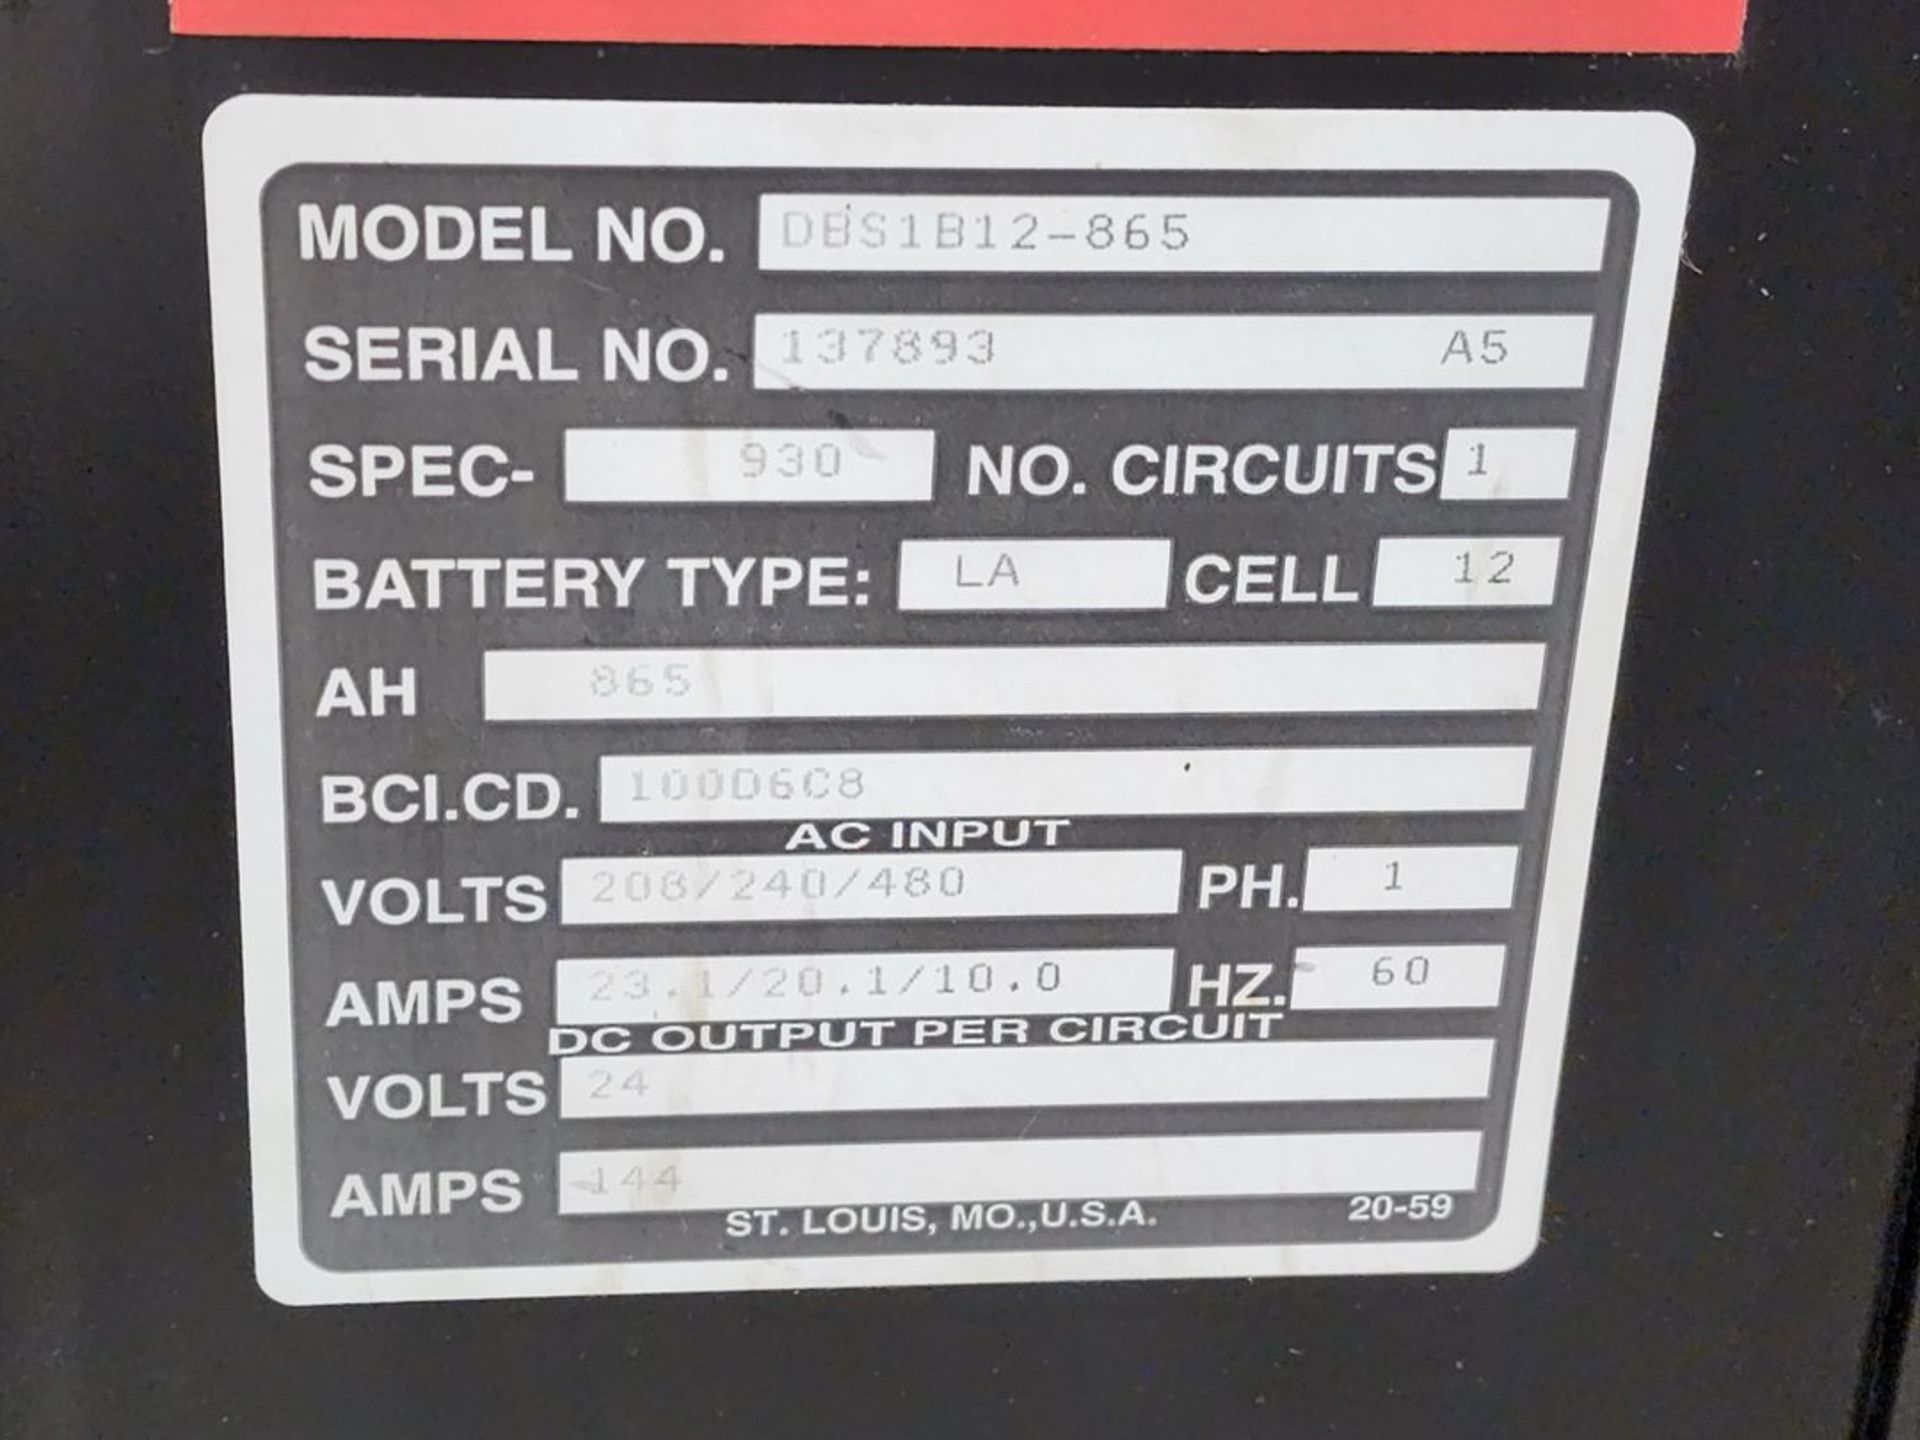 Douglas DBS1B12-865 Forklift Battery (Parts Only) 208/240/480V, 1PH, 60HZ, 23.1/20.1/10.0A - Image 5 of 5